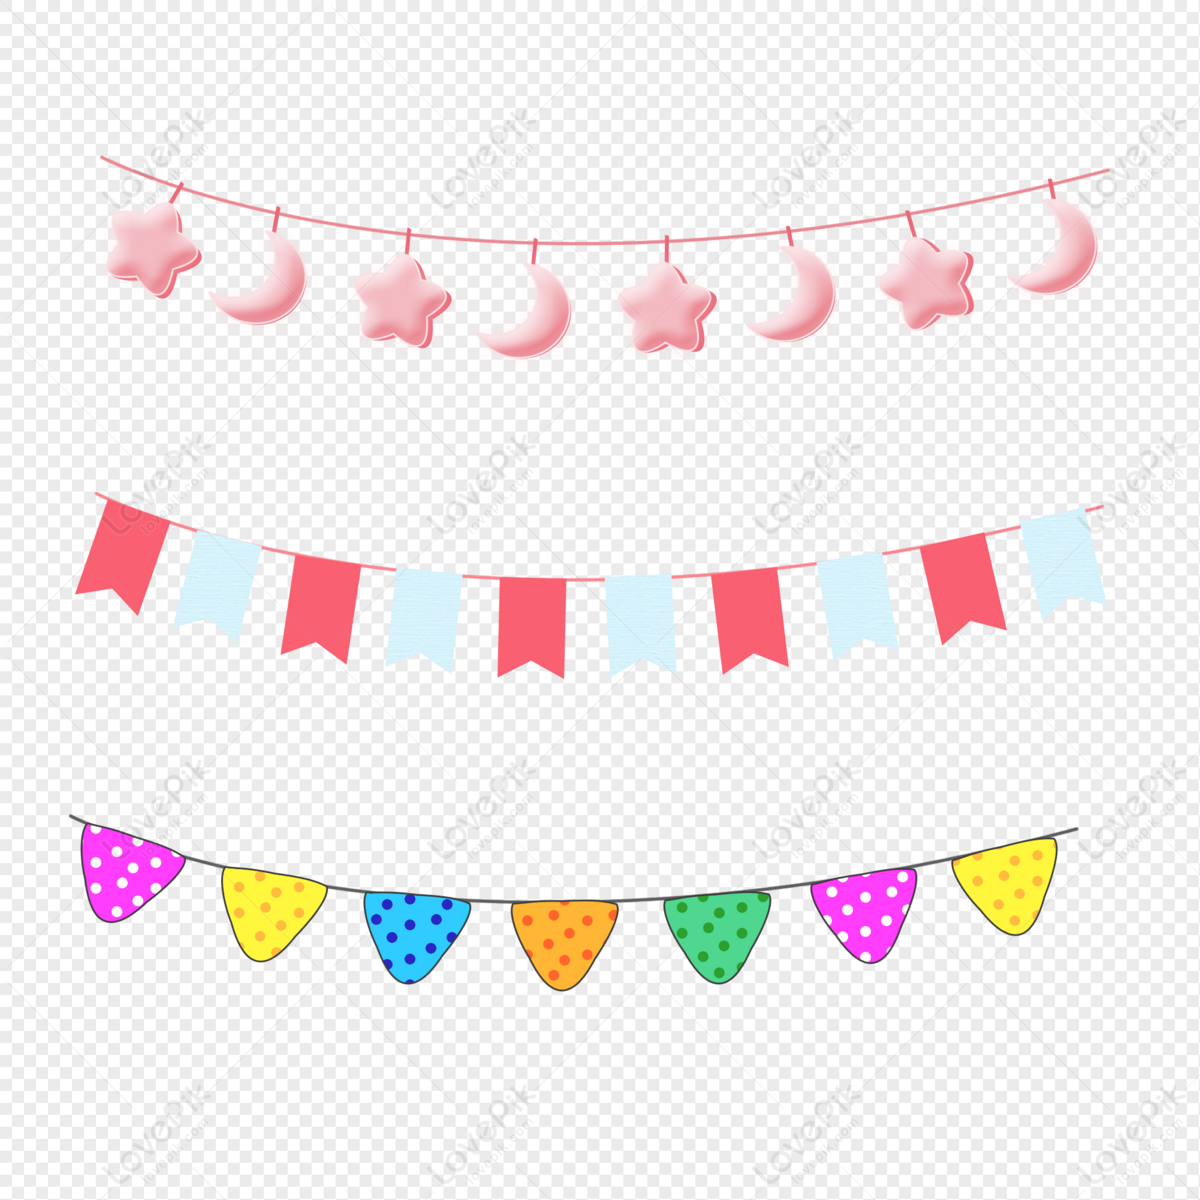 Cute Hanging Flag PNG Hd Transparent Image And Clipart Image For Free  Download - Lovepik | 401205114